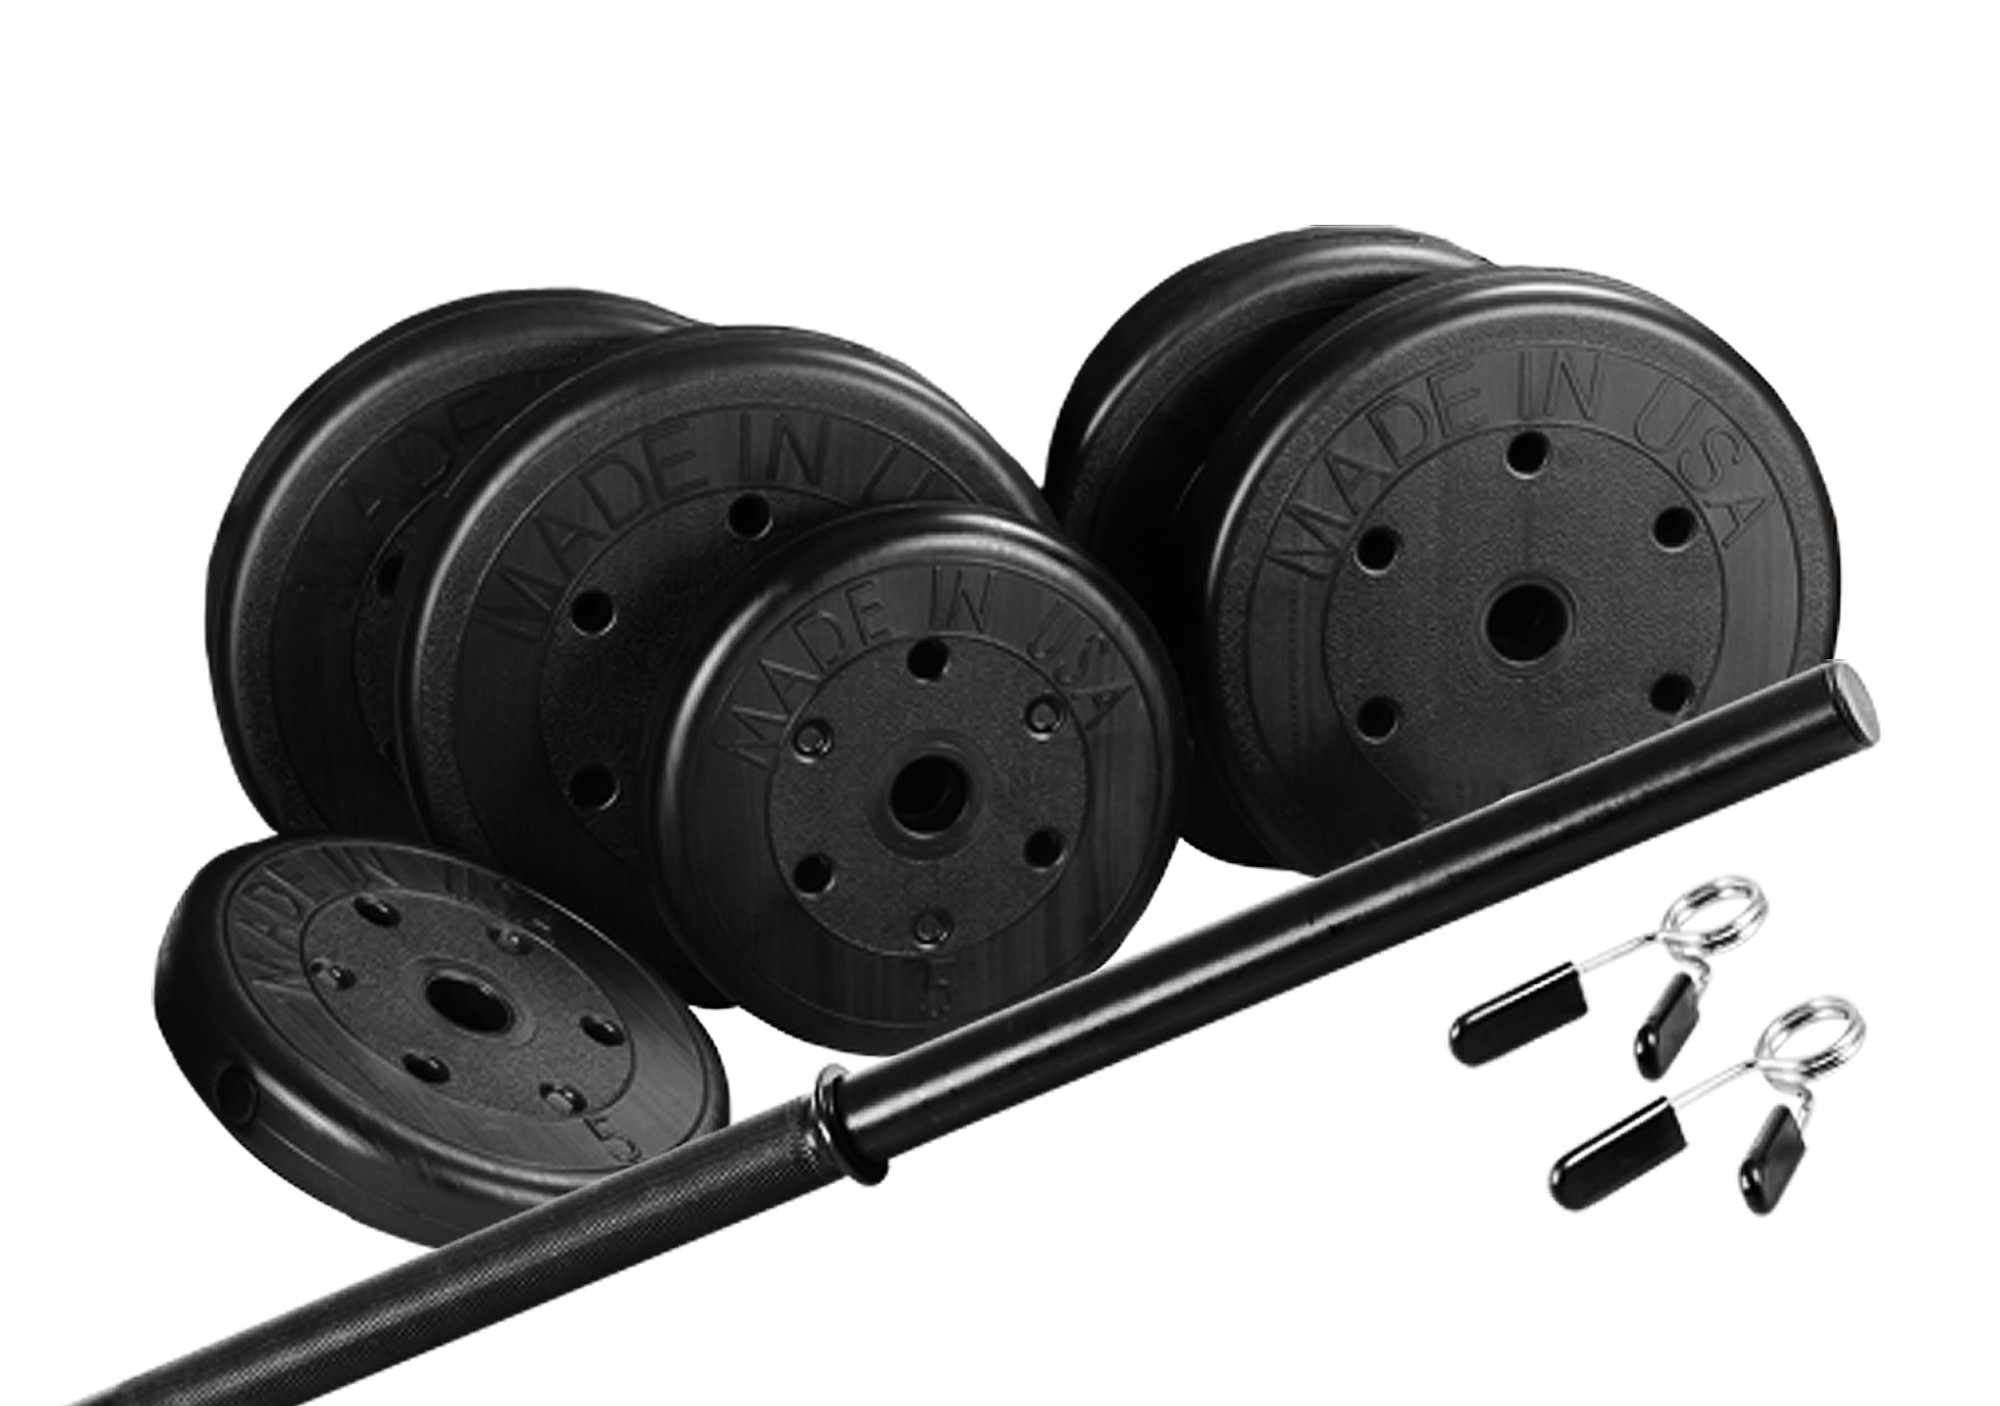 US Weight Duracast 55 lb. Barbell Weight Set with Threaded Barbell Bar, Locking Spring Clips - image 3 of 19